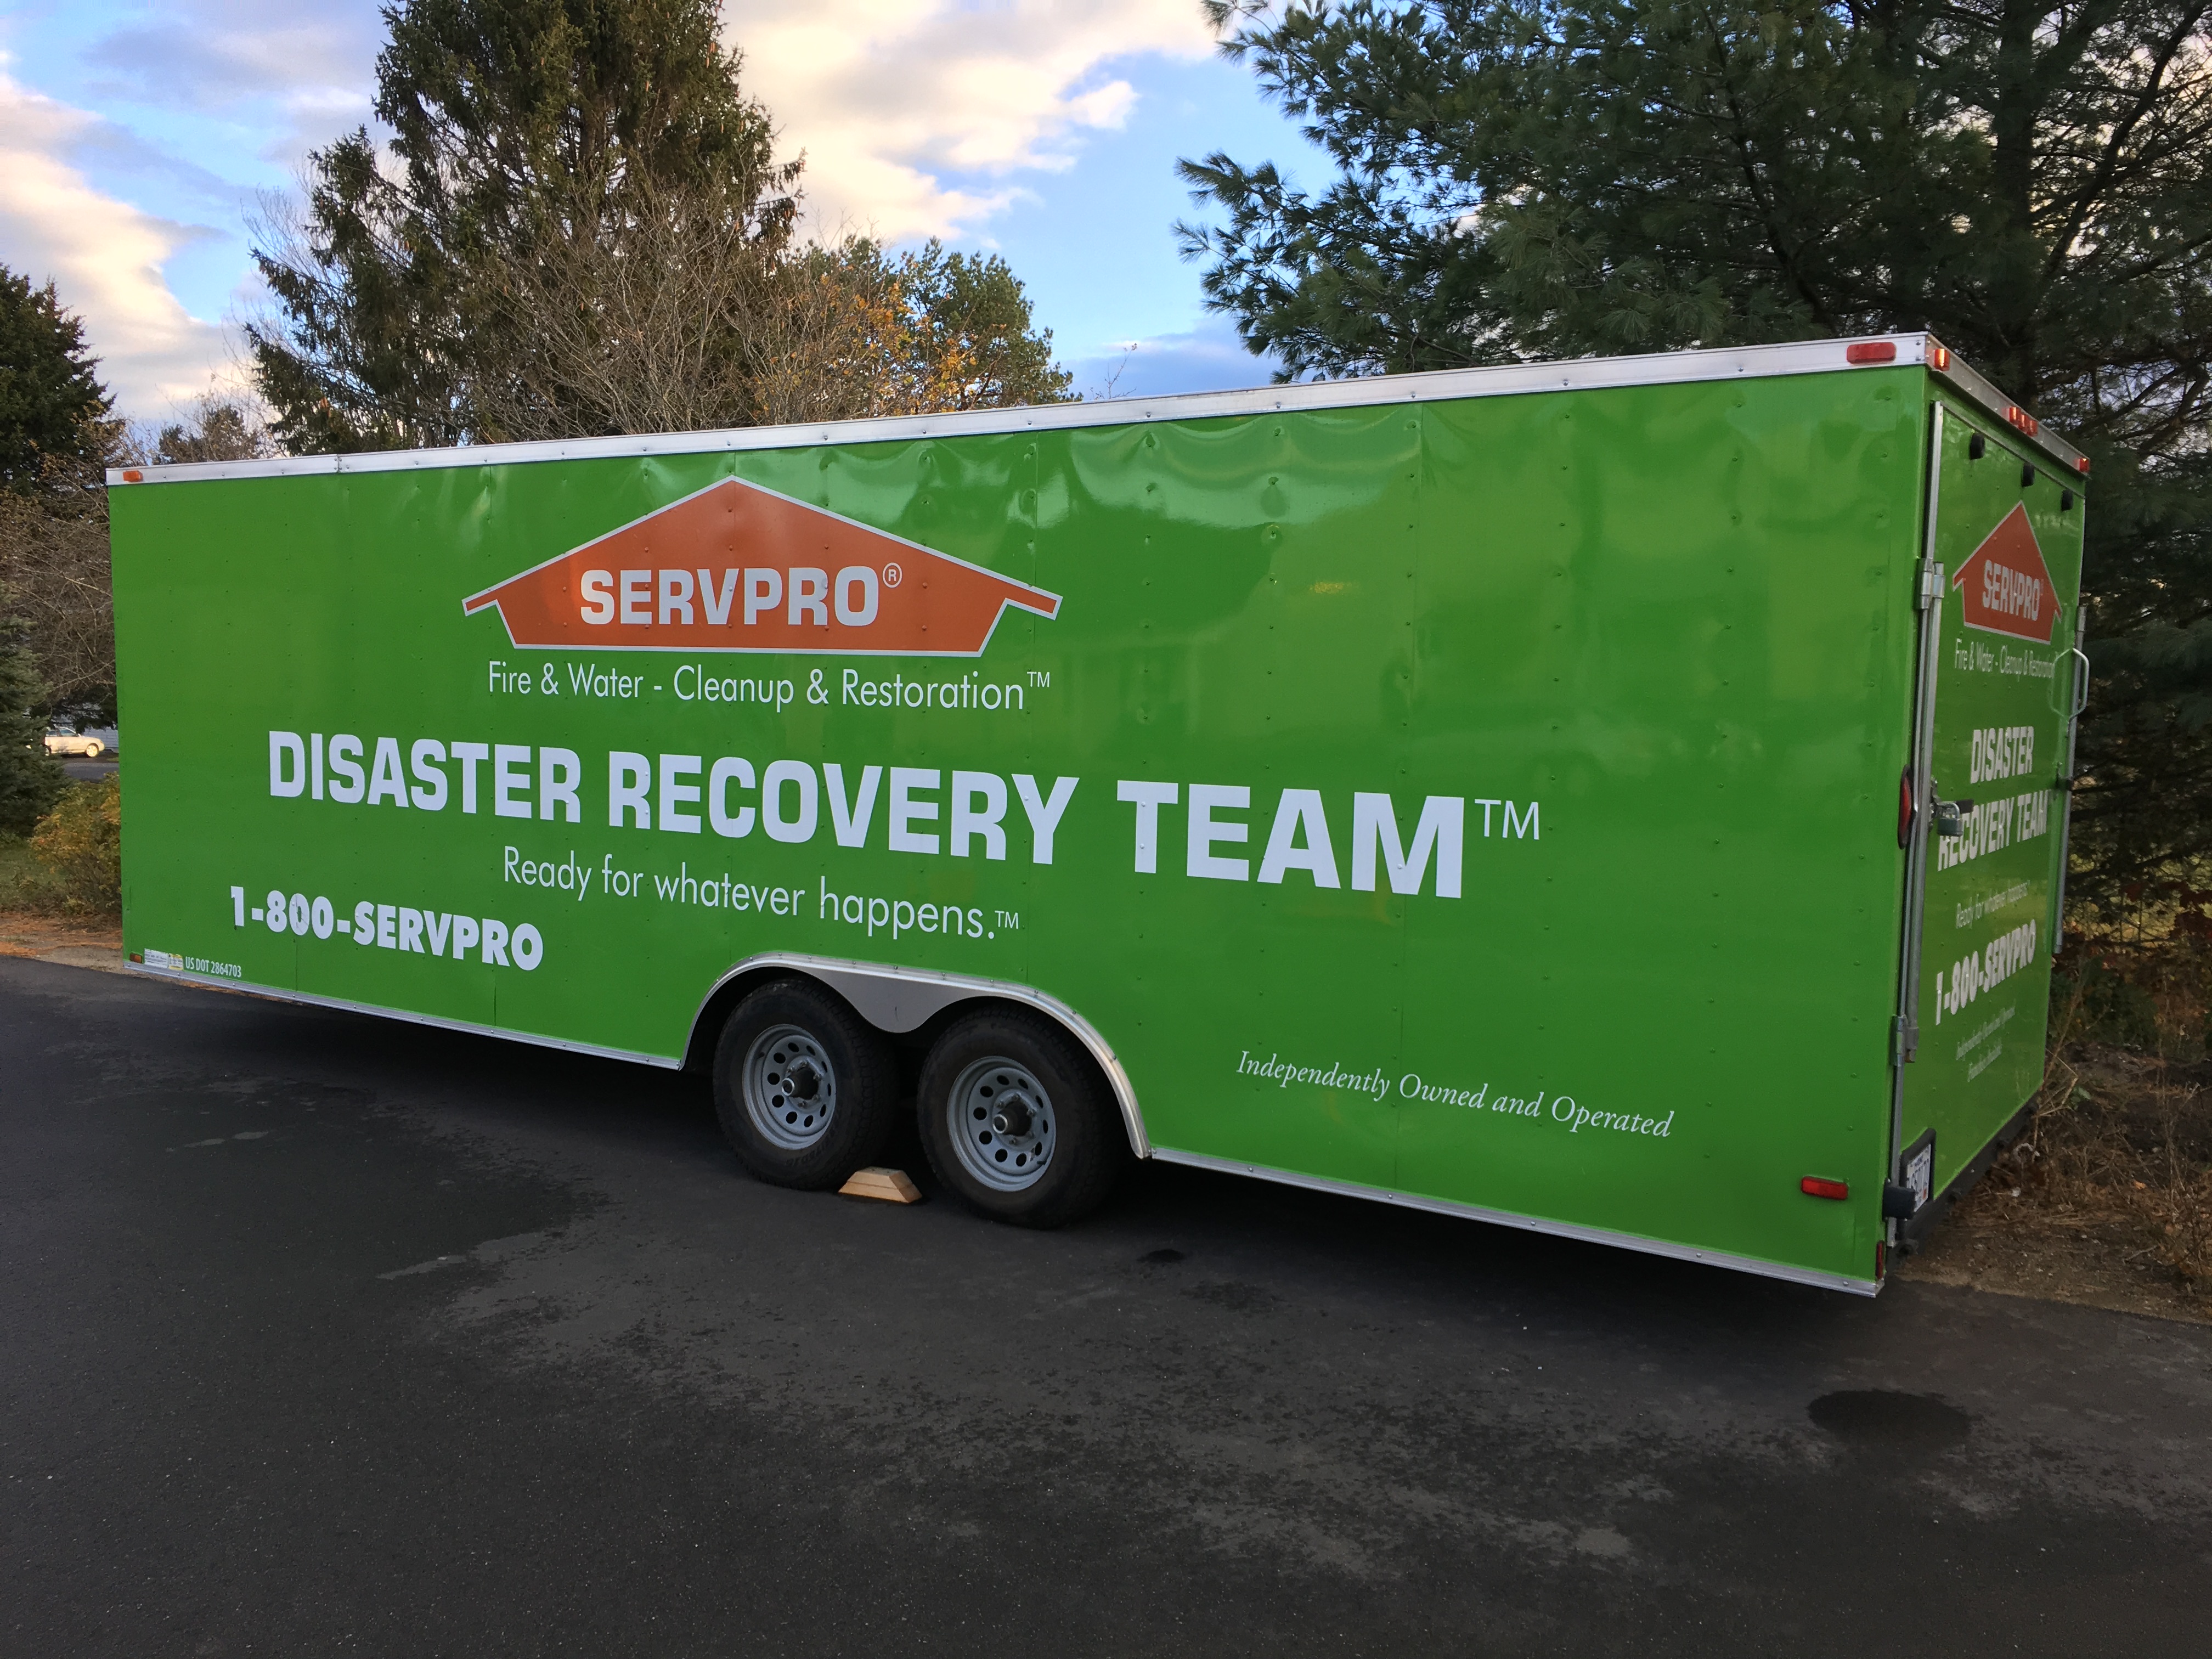 Our Disaster Recovery Team is always on standby and always ready to respond, 24/7/365!